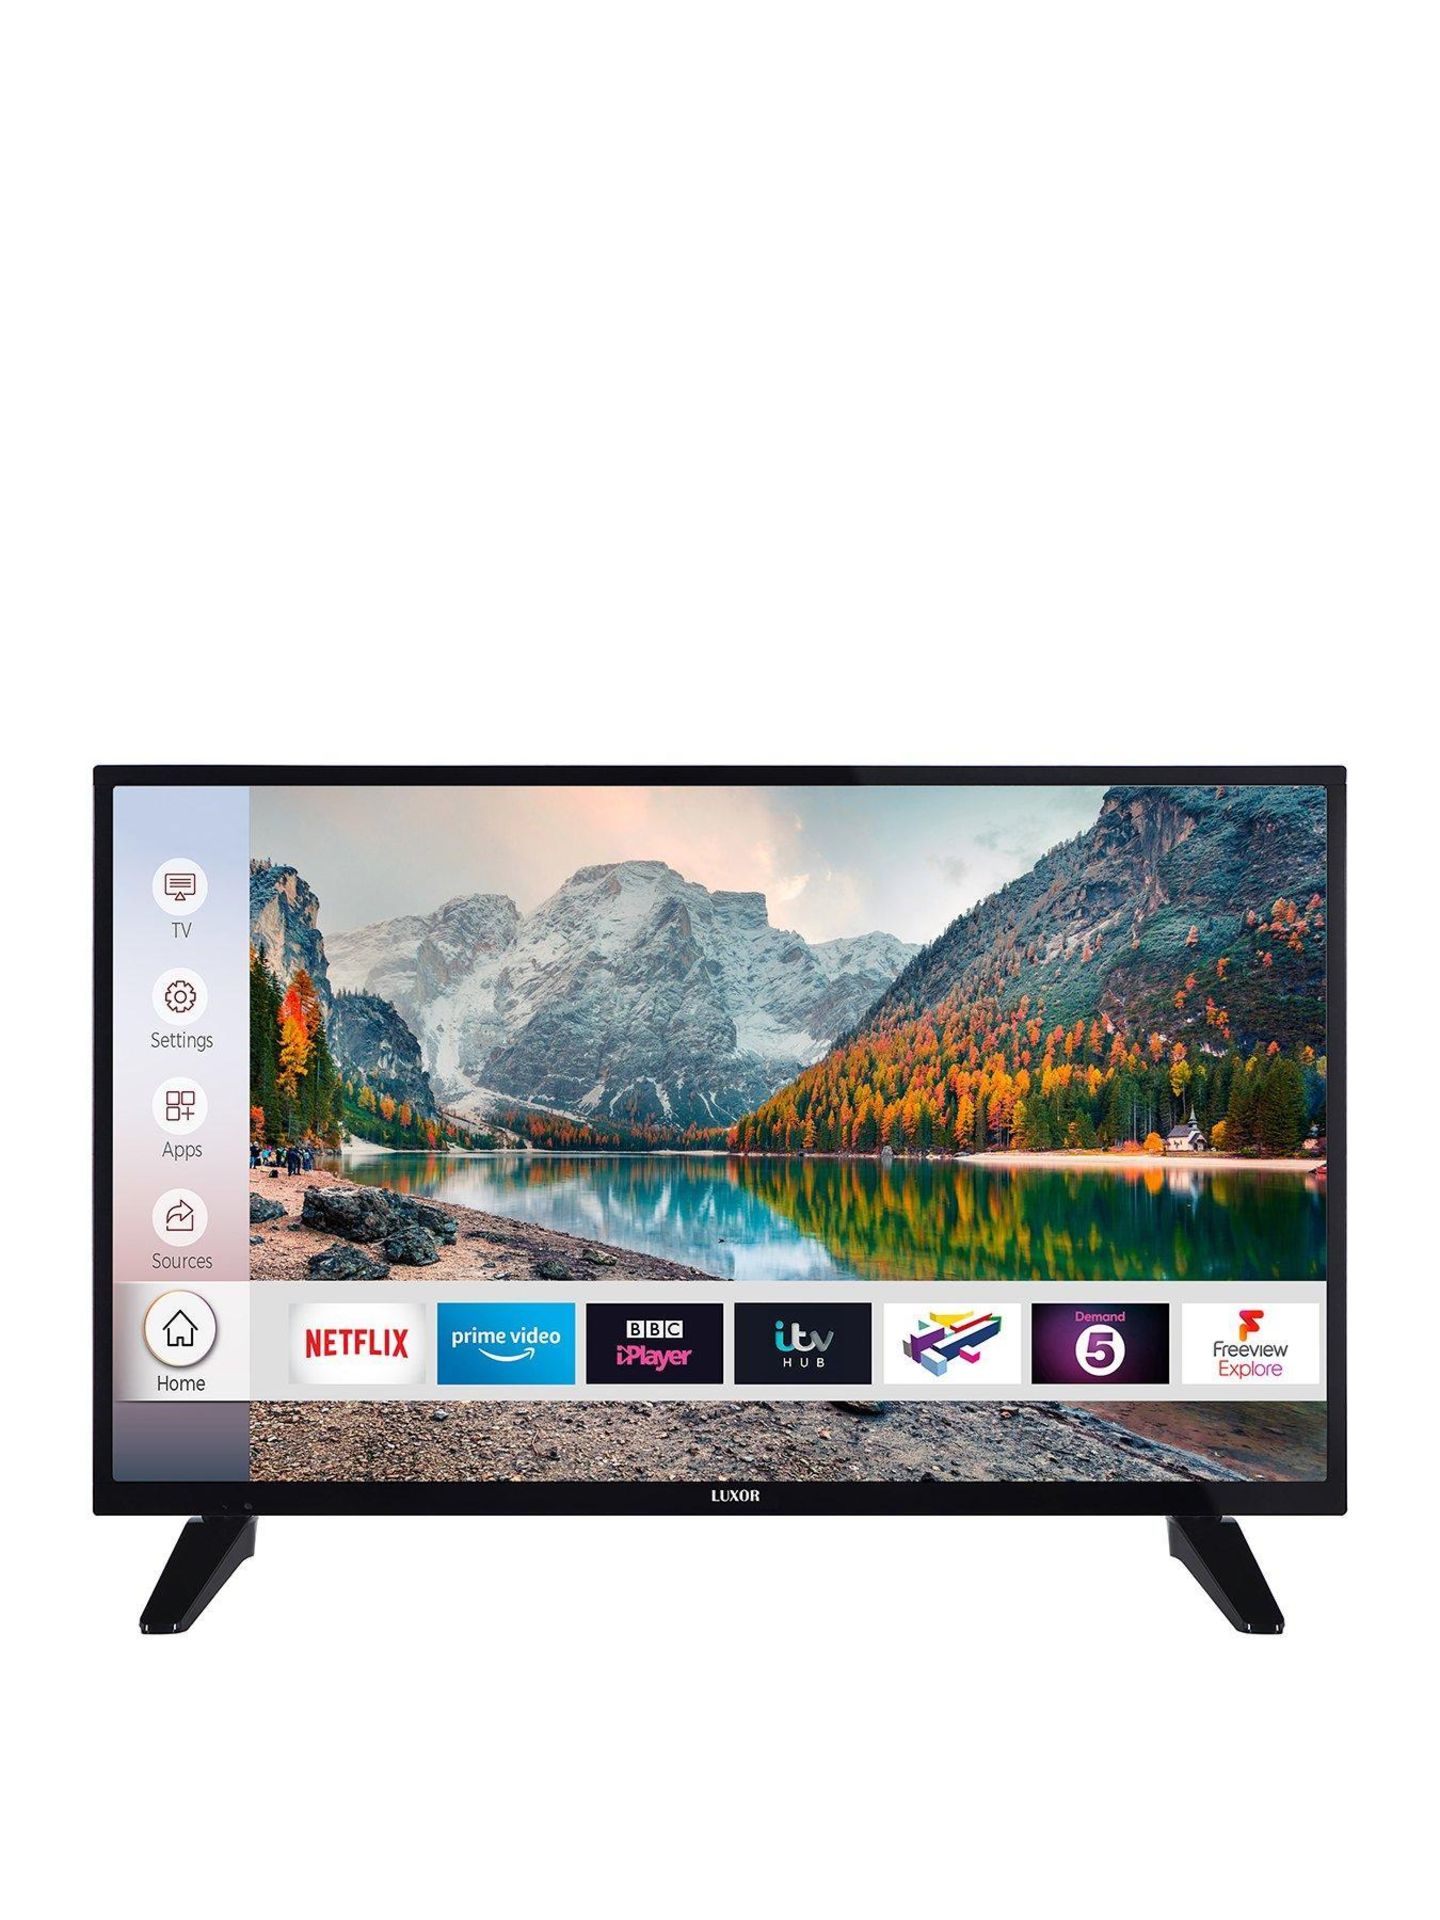 Luxor 32 inch hd ready, freeview play, smart tv [black] 48x74x19cm rrp: £298.0 - Image 2 of 2